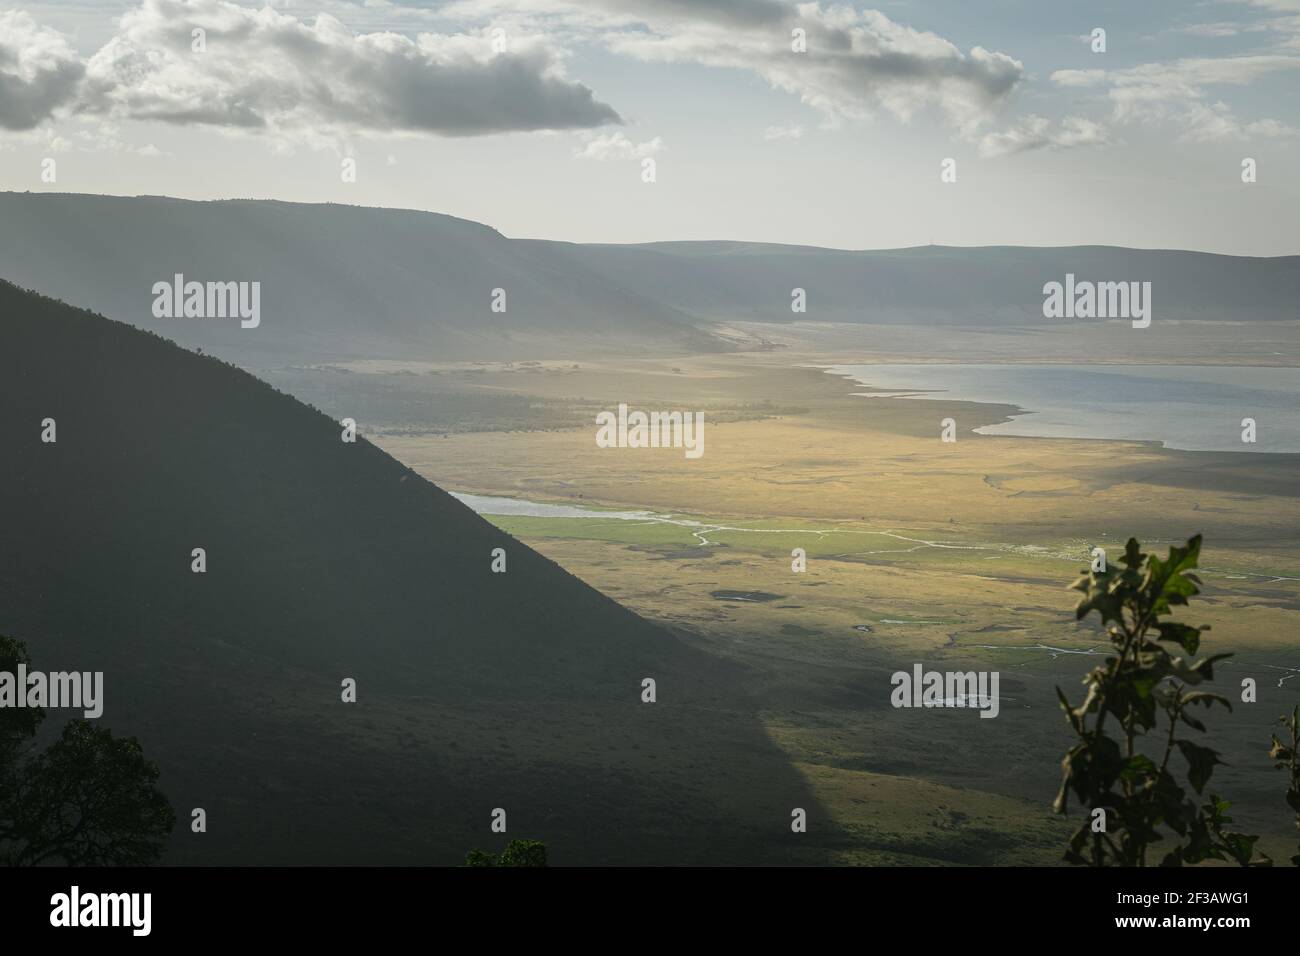 Panoramic view of the Ngorongoro Conservation Area on a clear day from the mountainside. Tanzania, Africa. Stock Photo